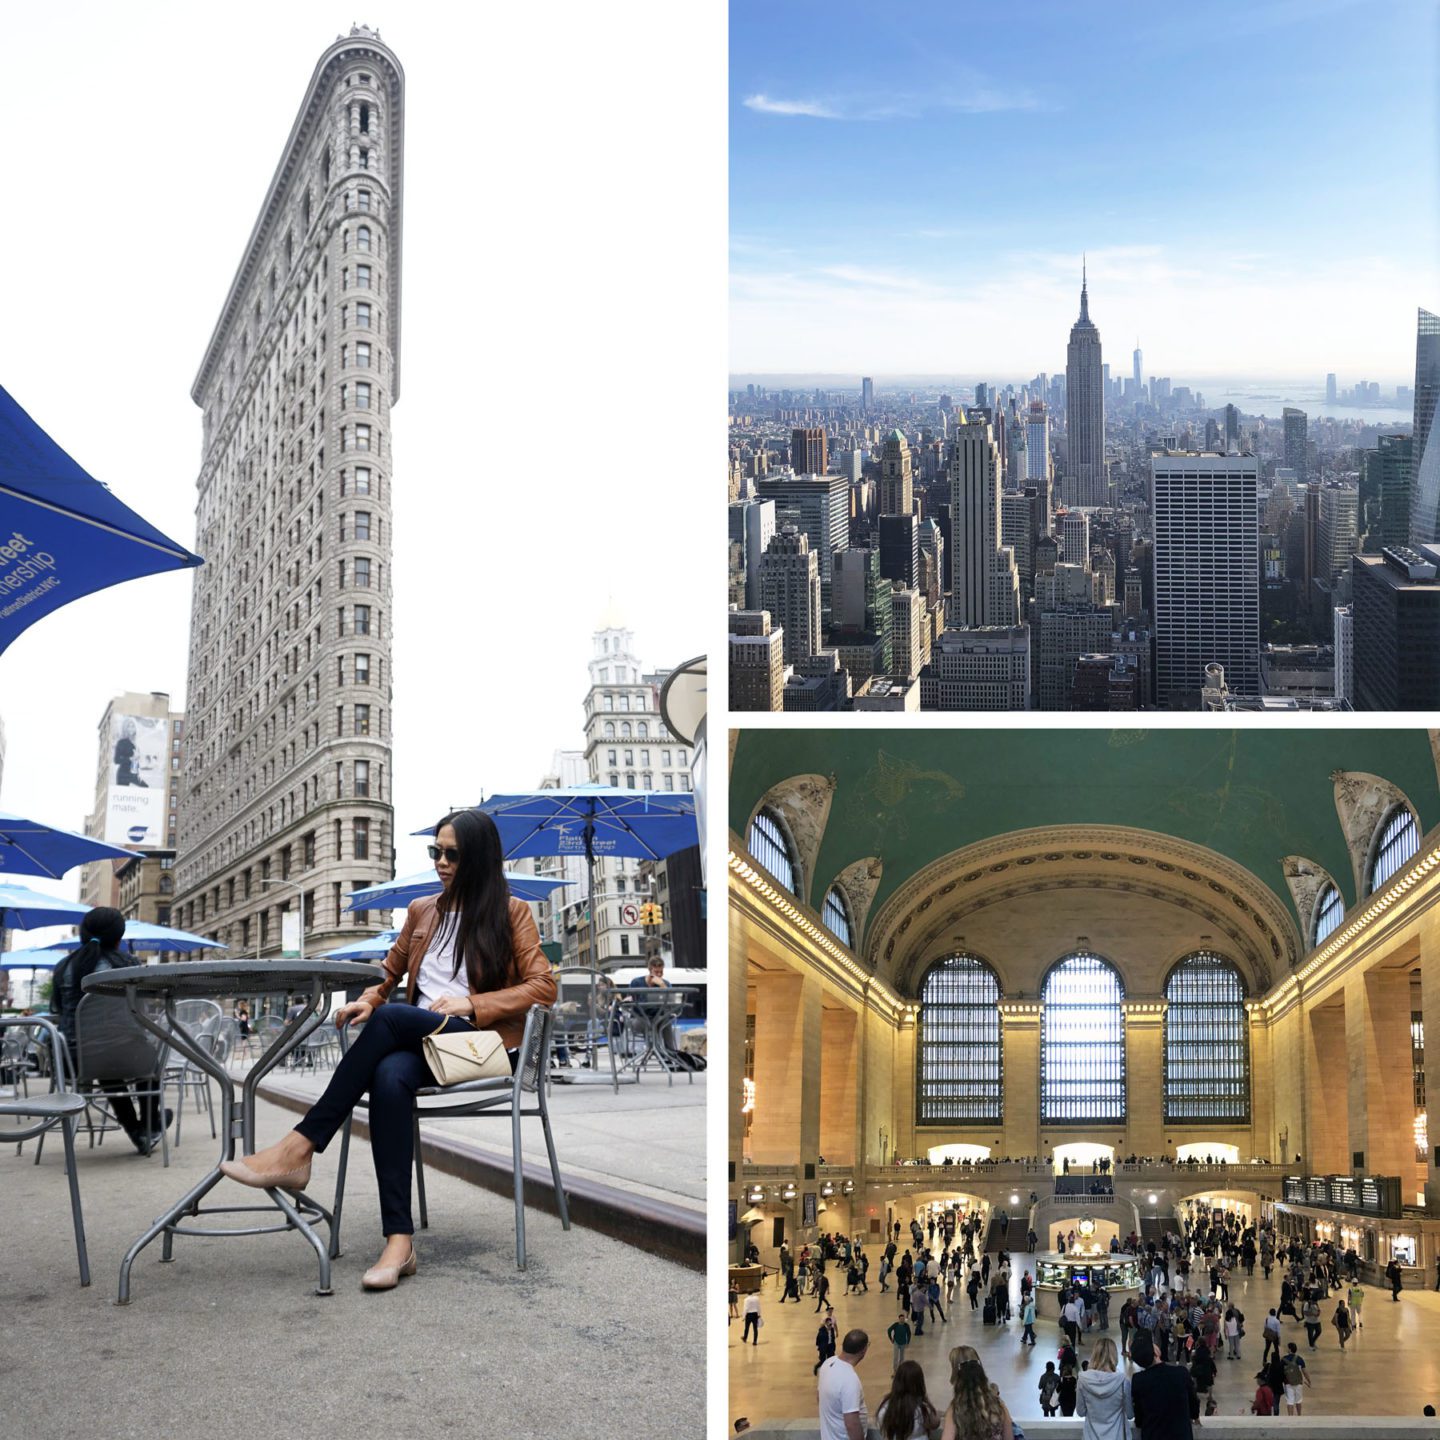 NYC Sights: Flatiron Building, Top of the Rock, Grand Central